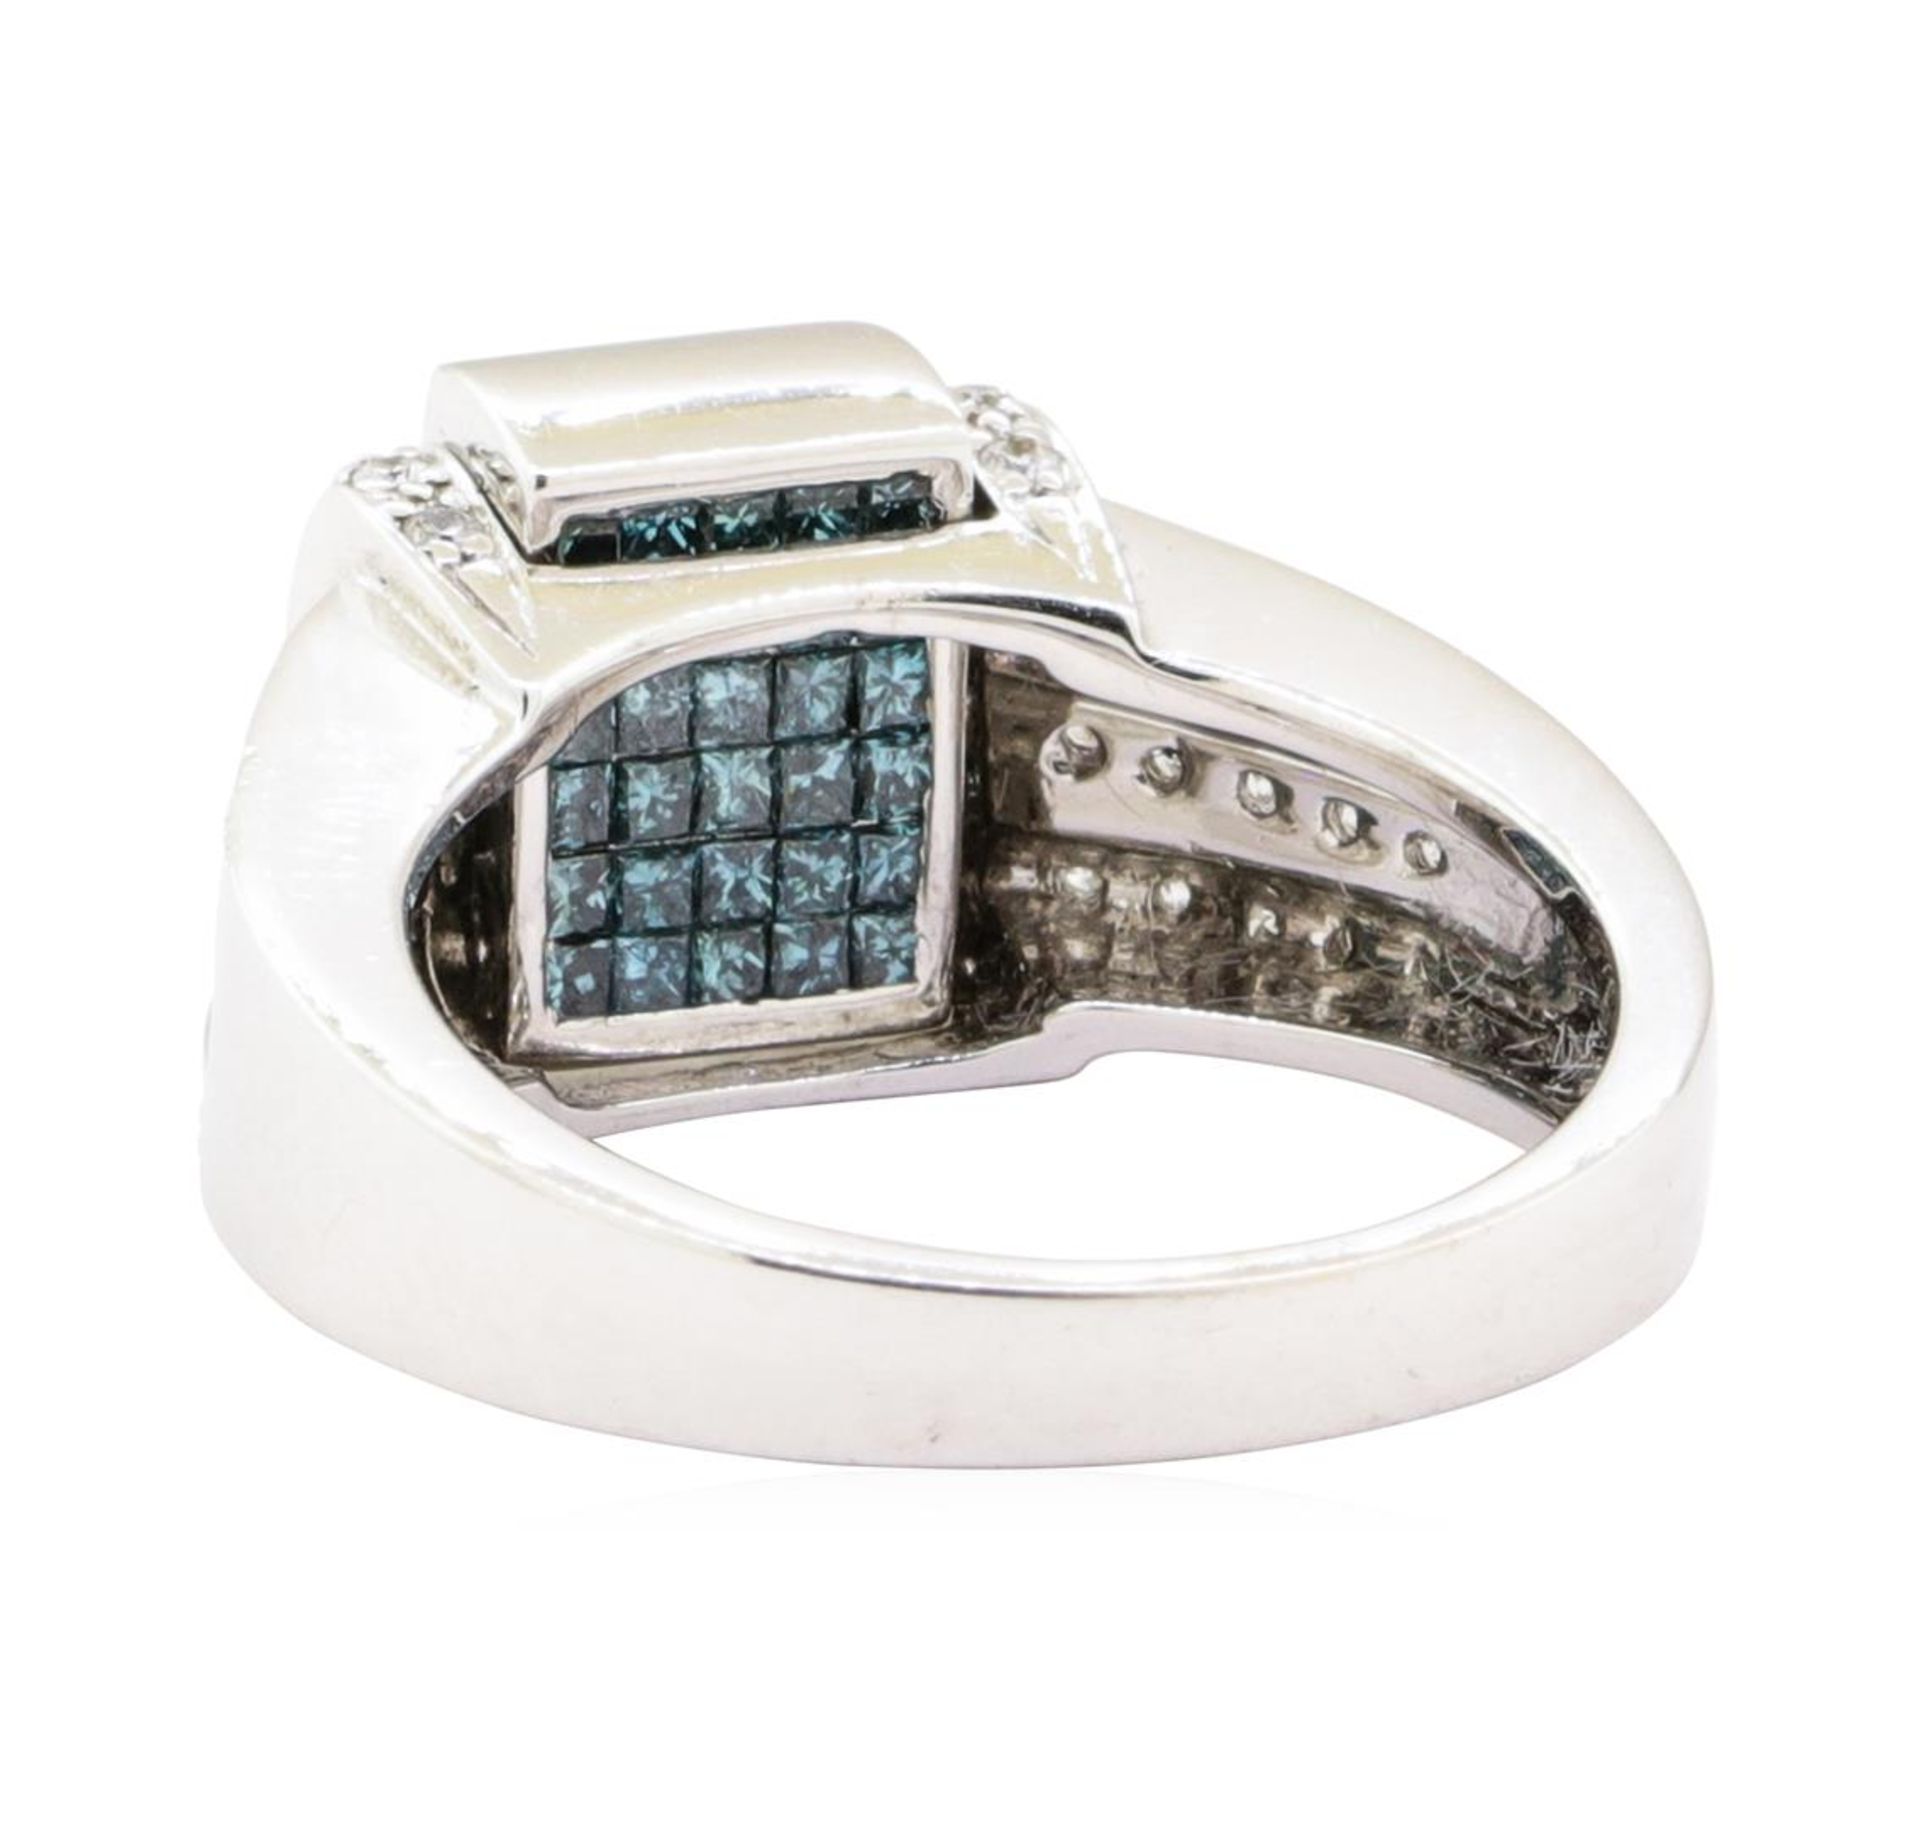 1.20 ctw White and Blue Diamond Ring - 14KT White Gold - Image 4 of 5